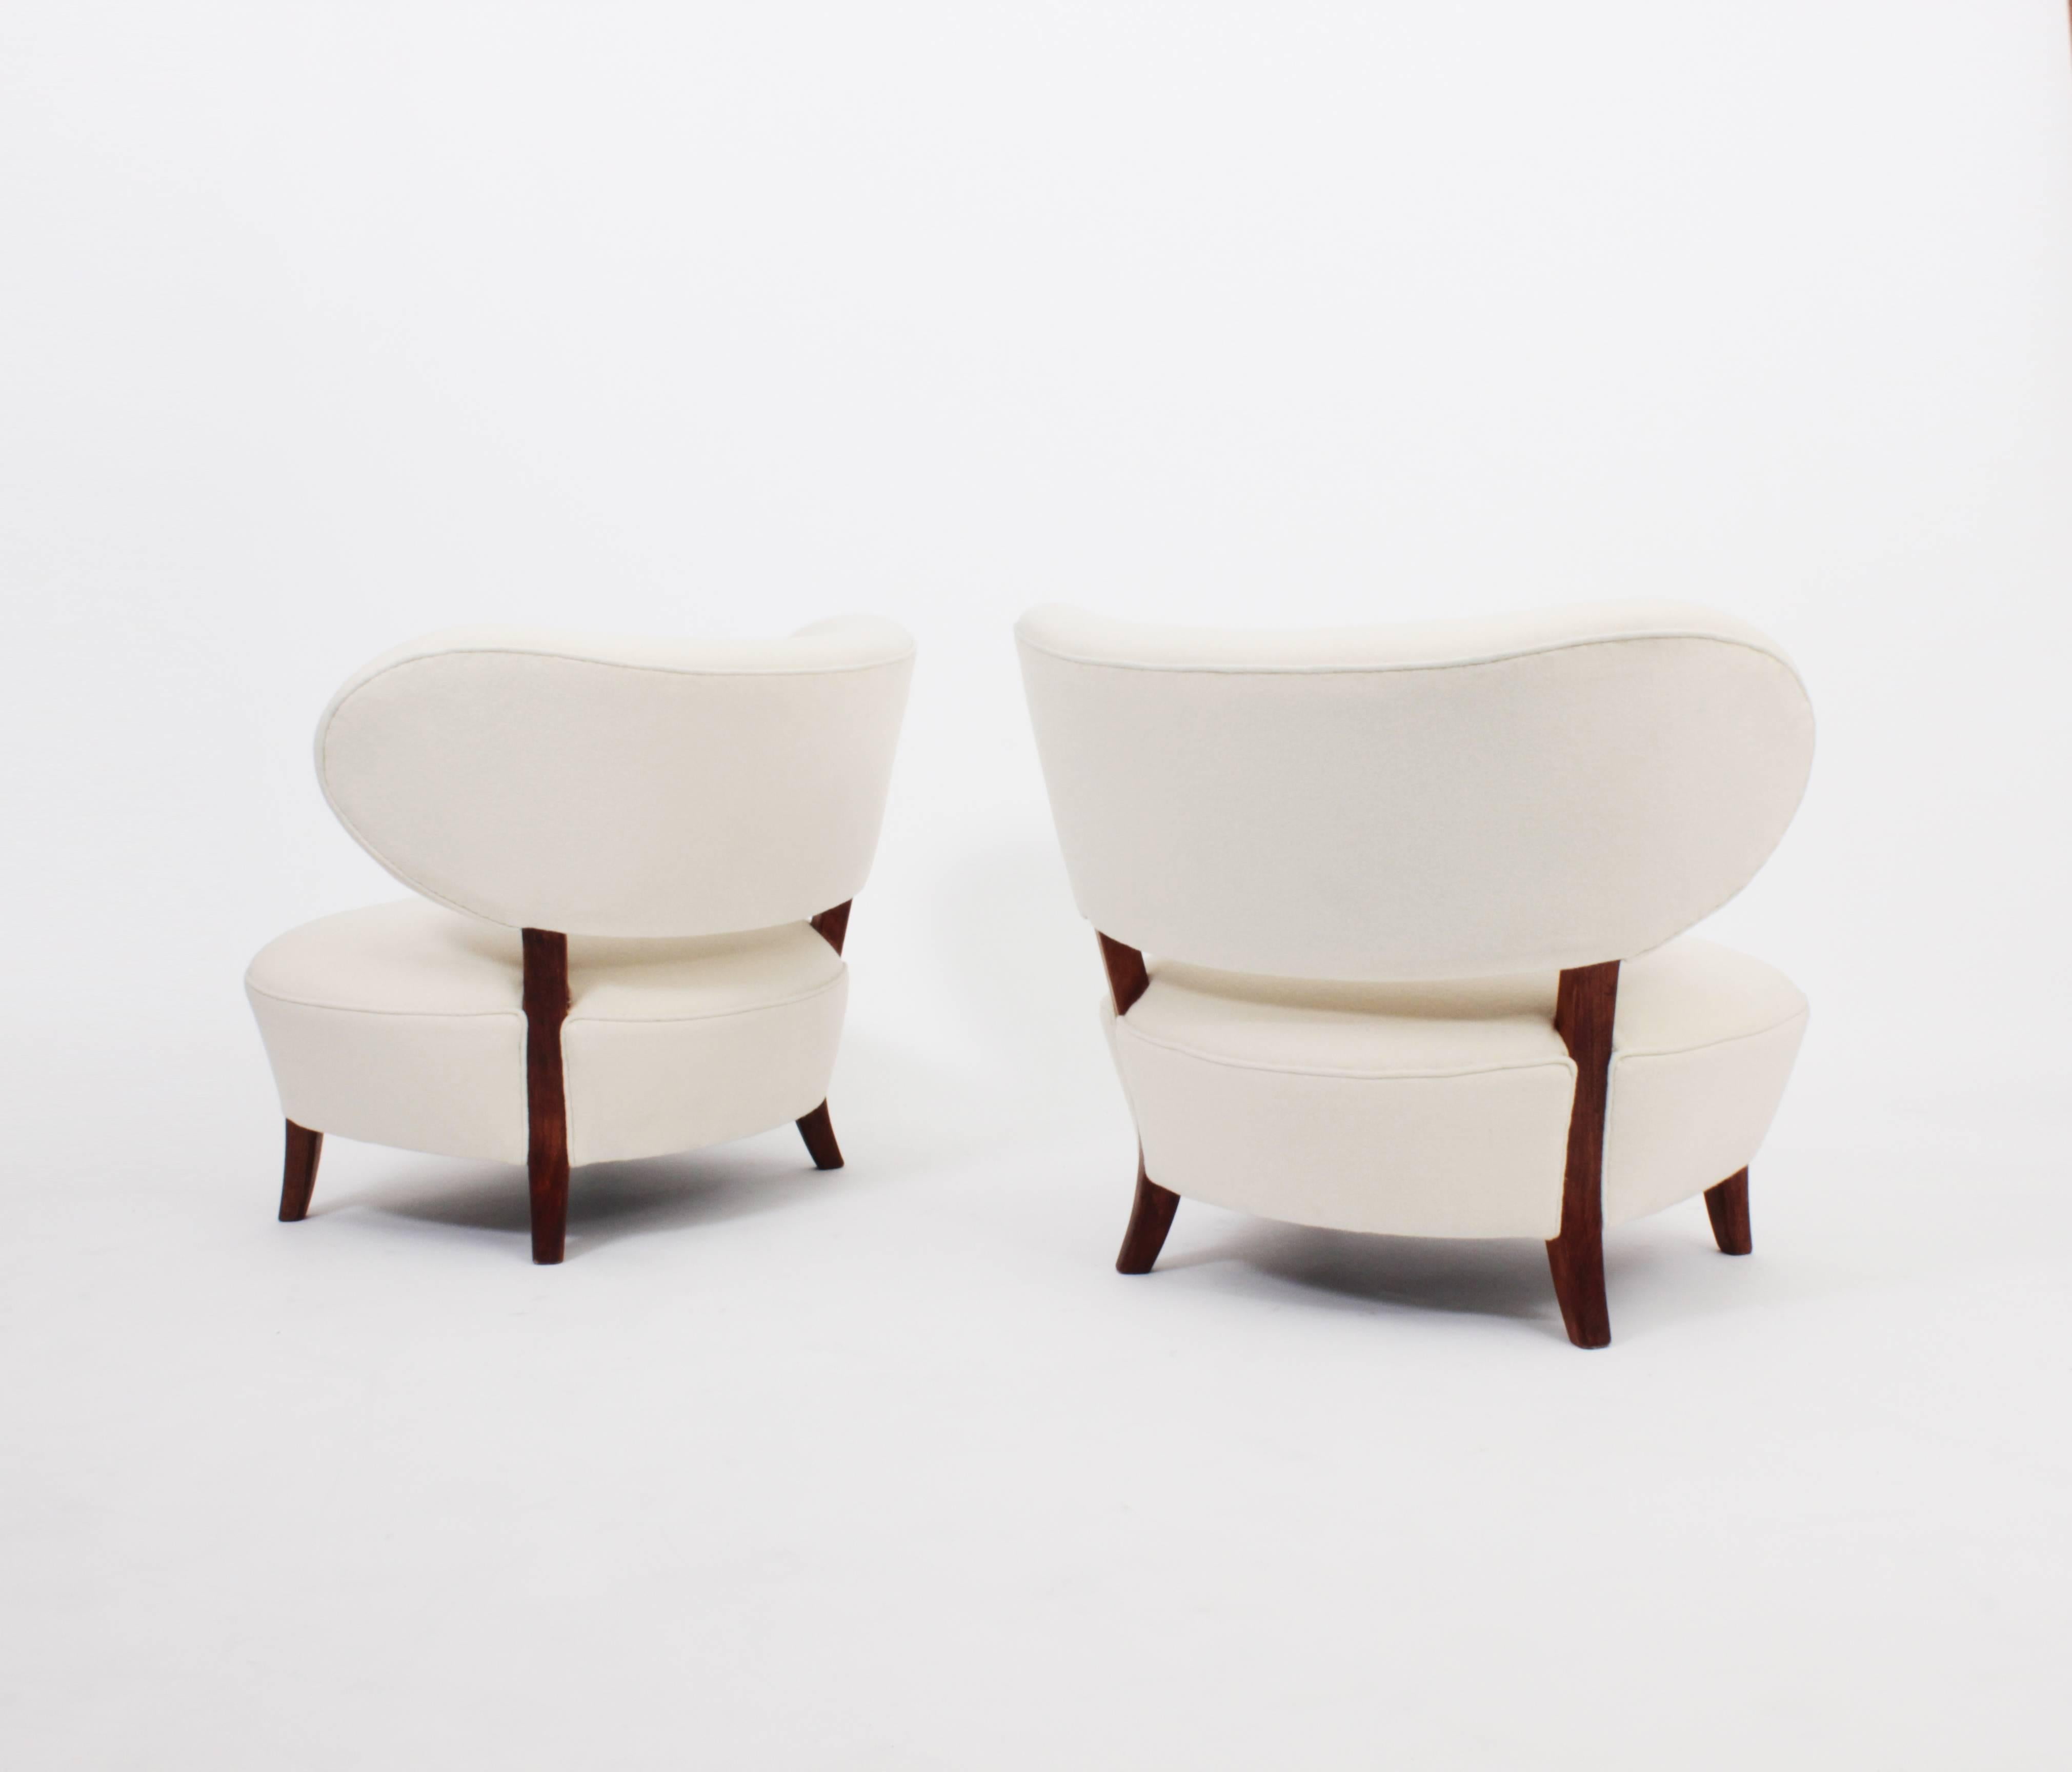 Upholstery Pair of Otto Schulz Easy Chairs for Boet, Sweden, circa 1940